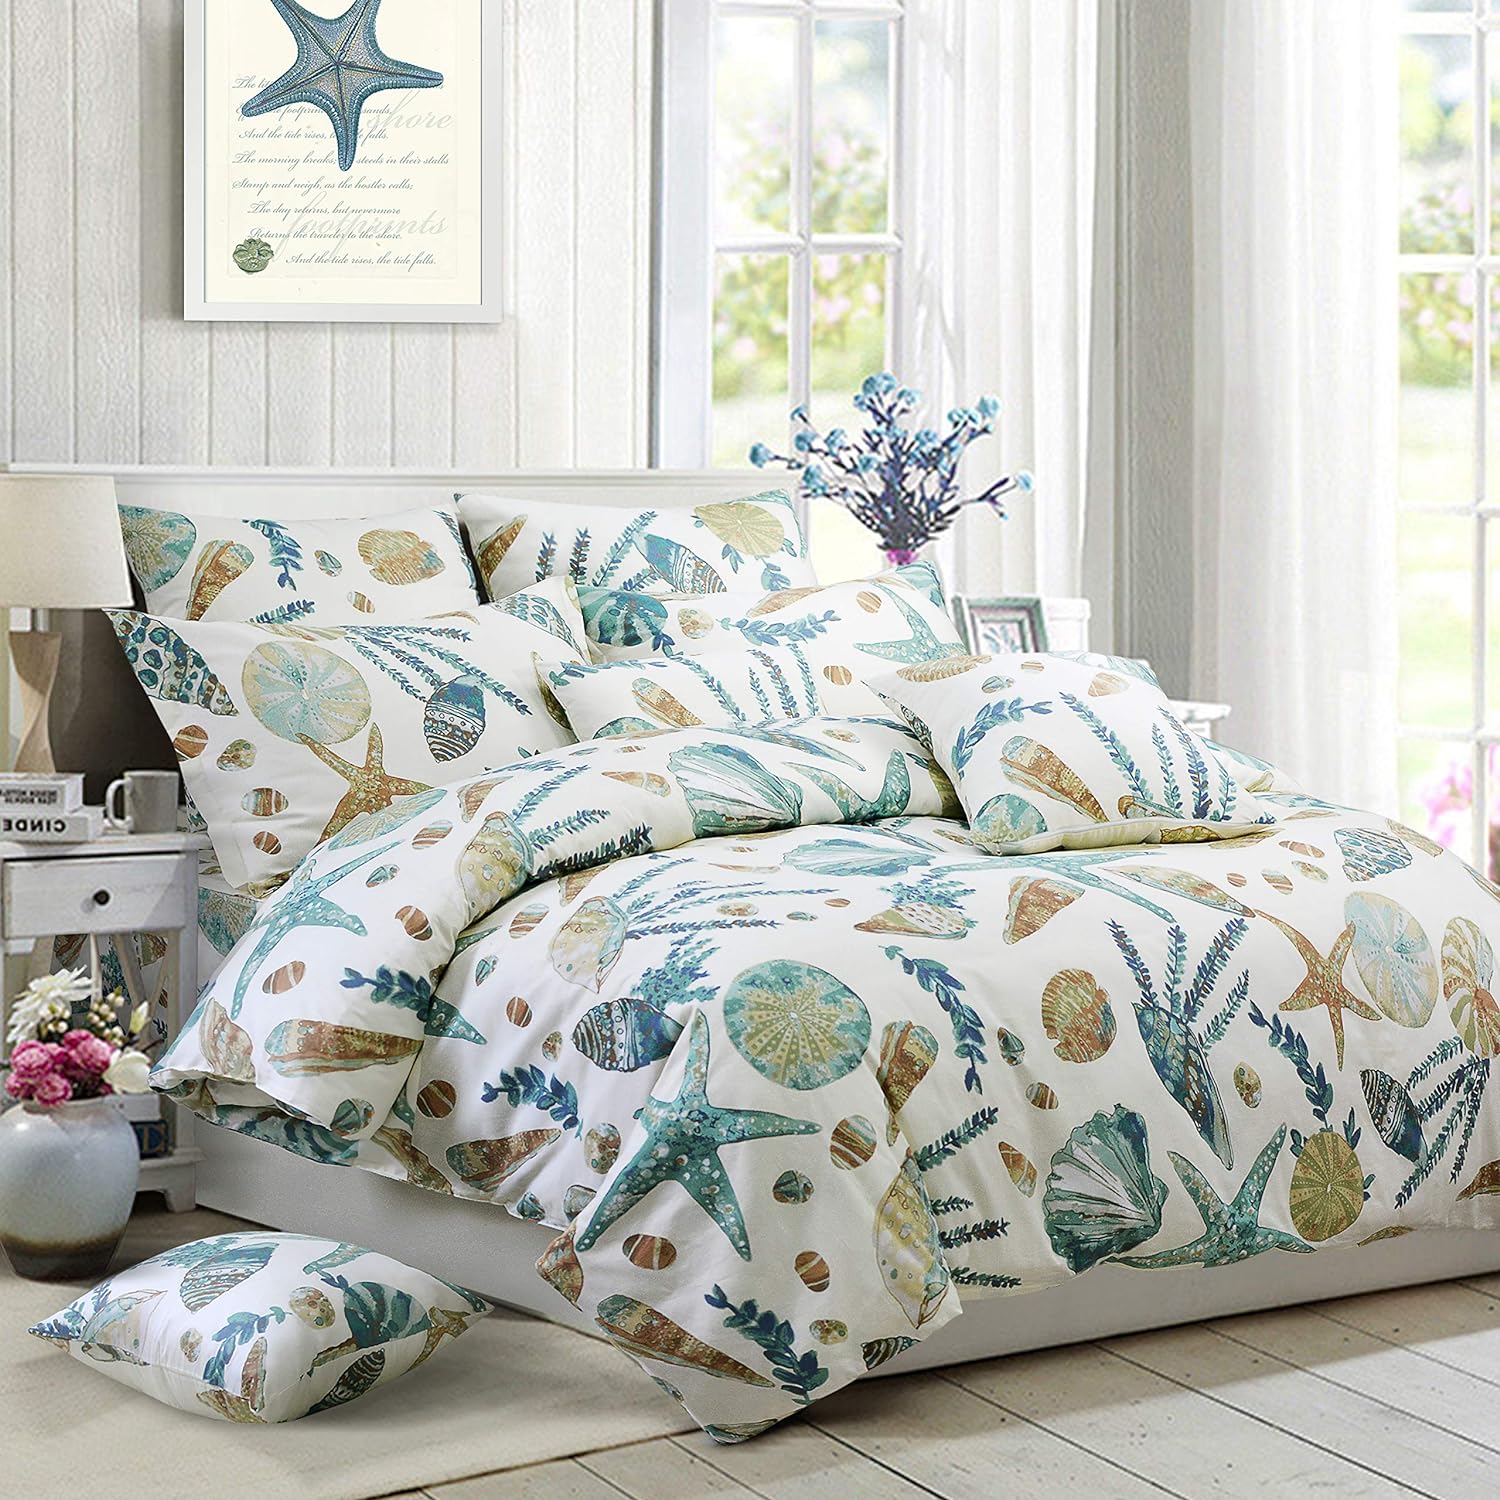 FADFAY Duvet Cover Set Queen Beach Themed Bedding Sets 100% Cotton Super Soft Coastal Bedding White Teal Seashells and Starfish Nautical Bedding with Hidden Zipper Closure 3 Pieces Queen Size